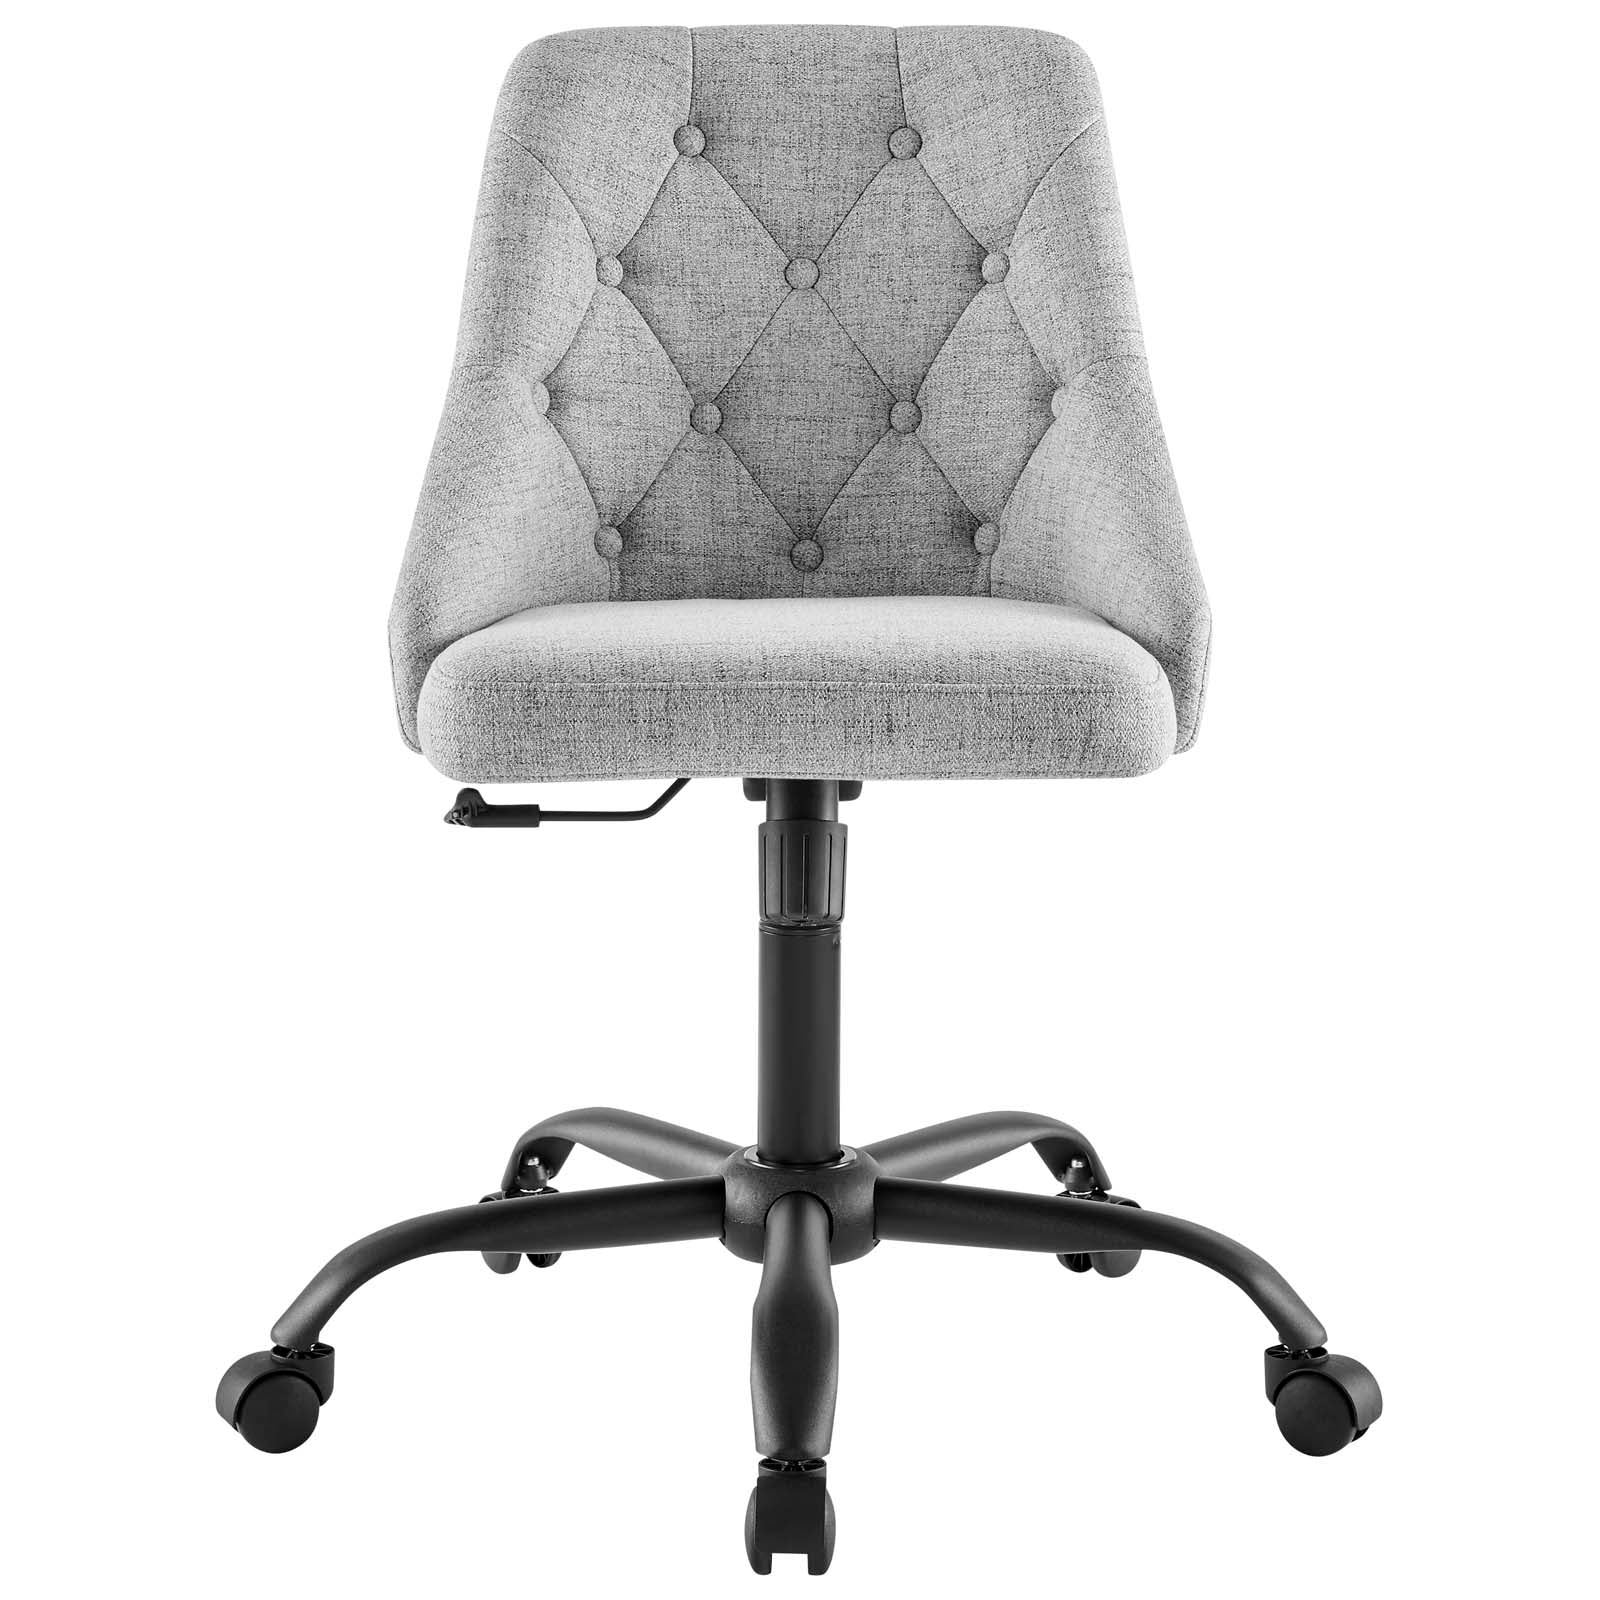 Modway Task Chairs - Distinct Tufted Swivel Upholstered Office Chair Black Light Gray